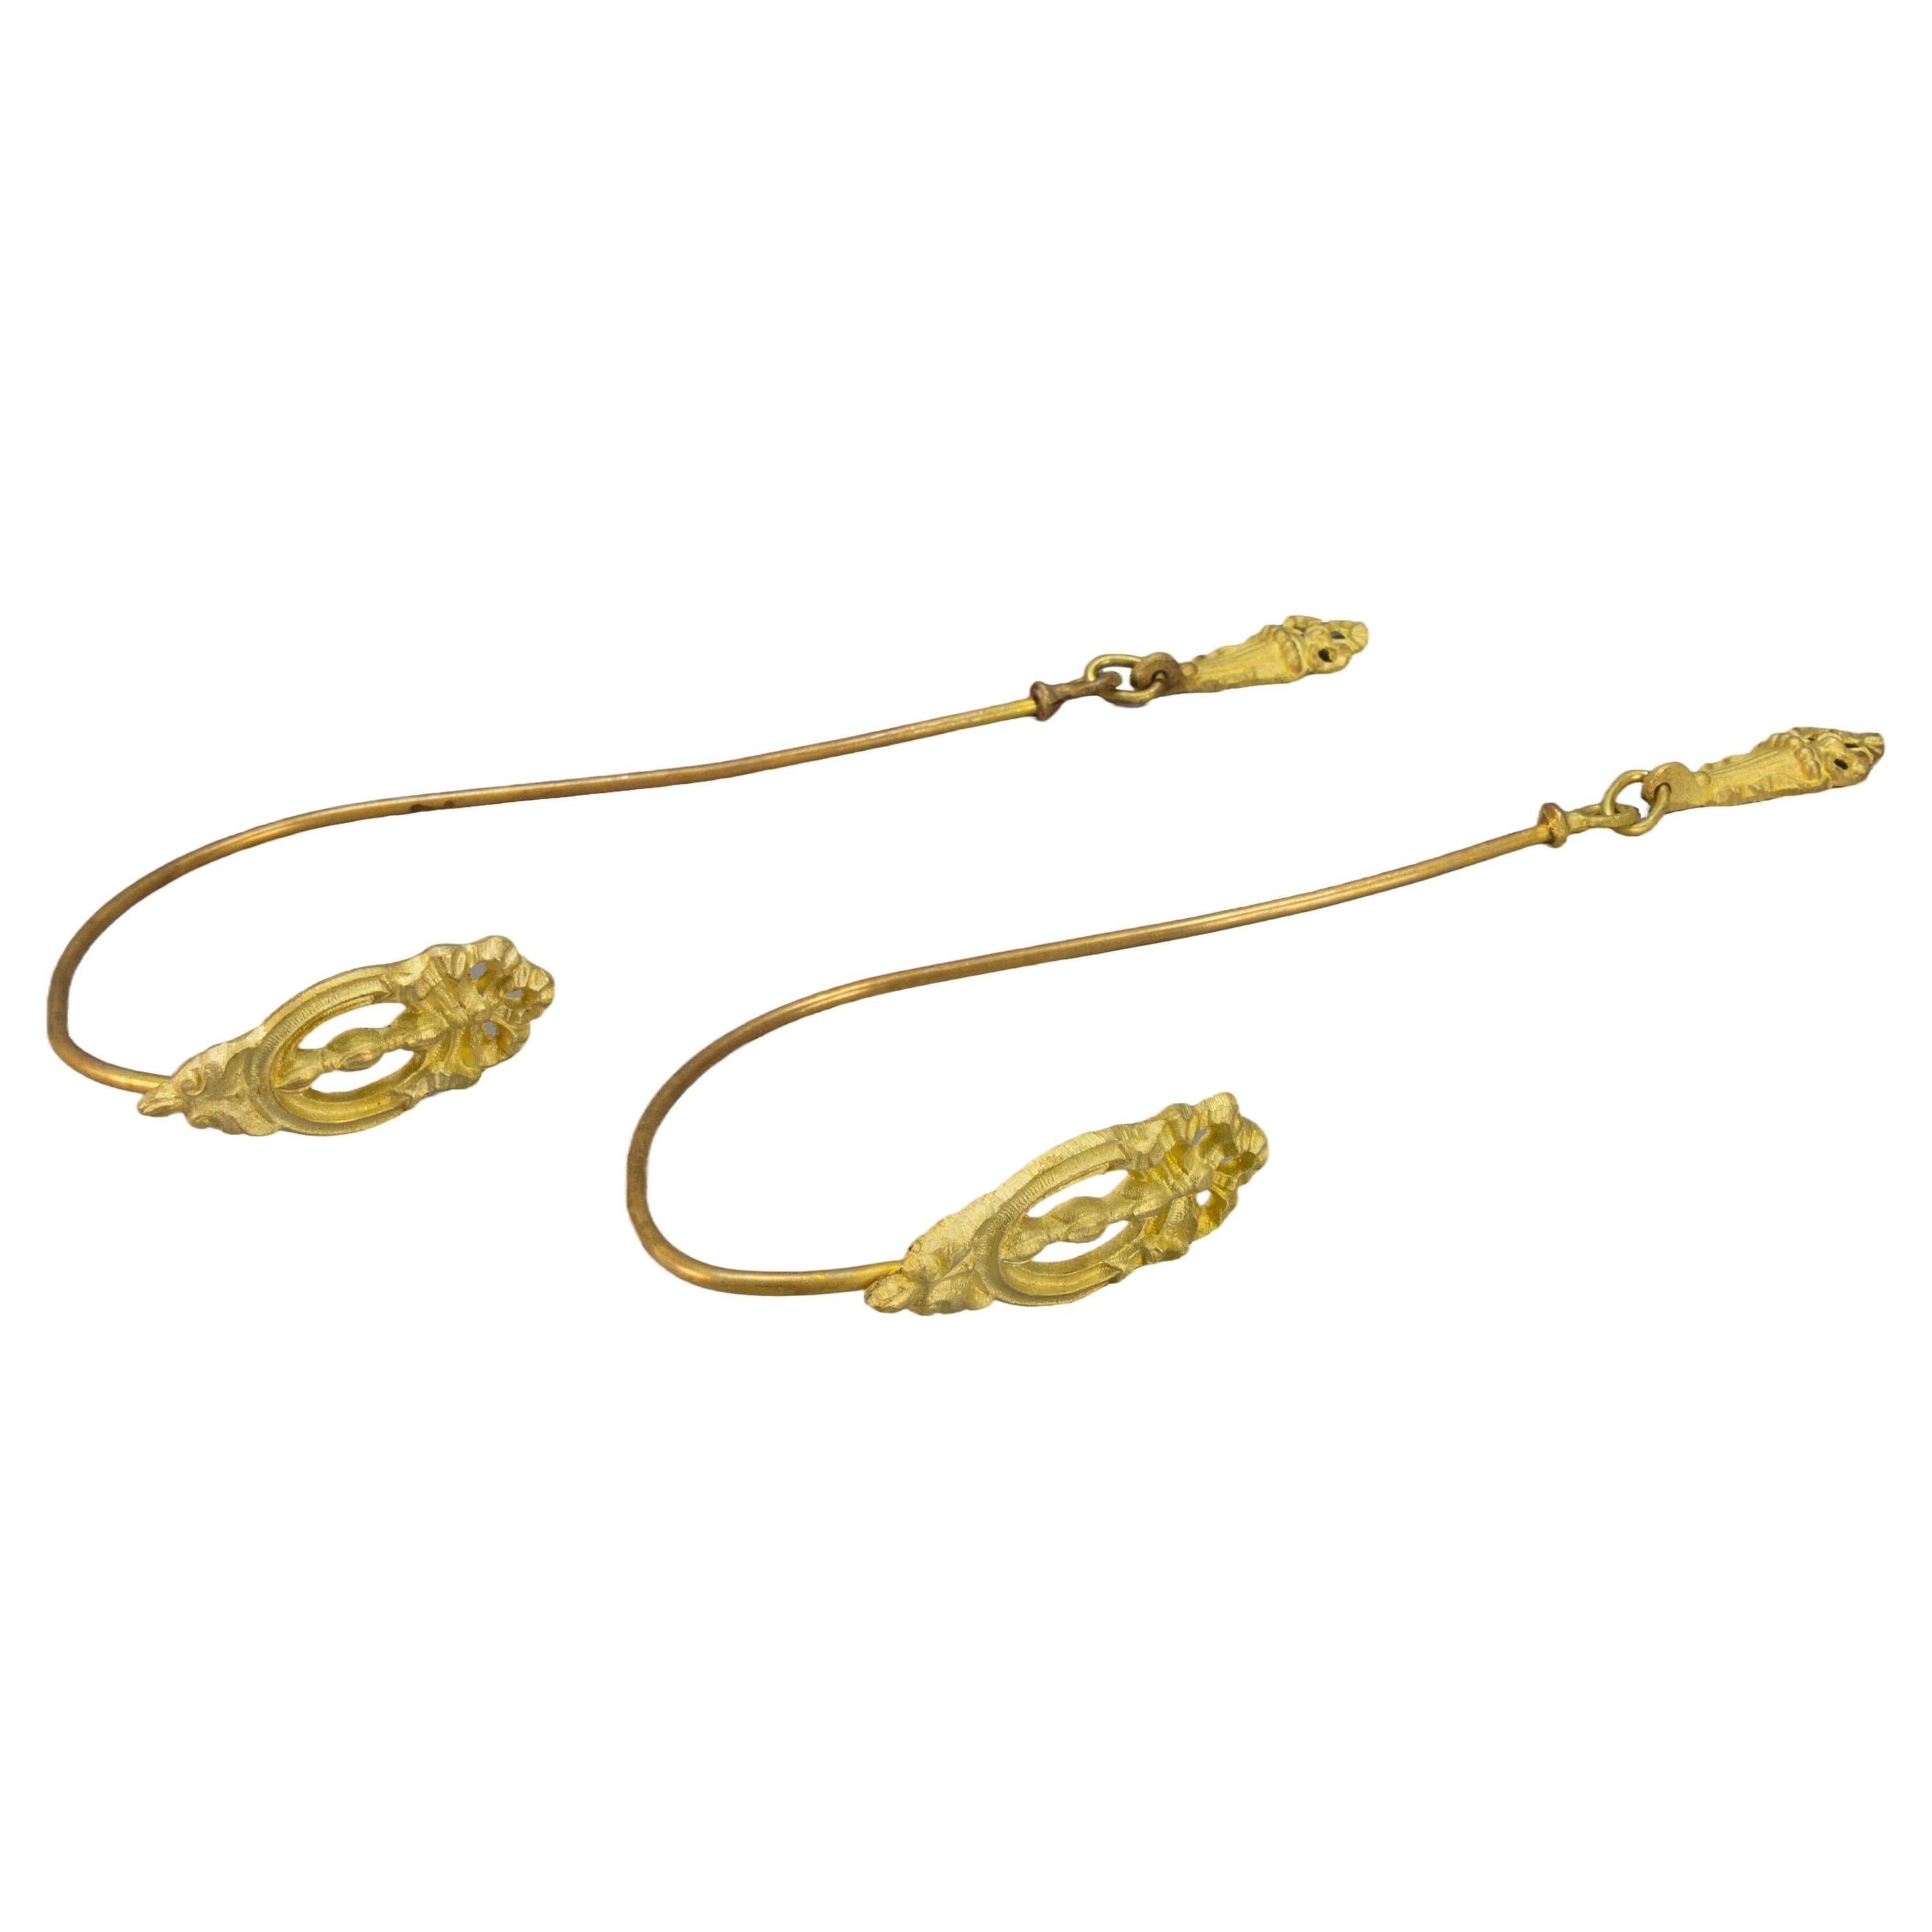 Pair of French Bronze and Brass Curtain Tiebacks or Curtain Holders, ca. 1920 For Sale